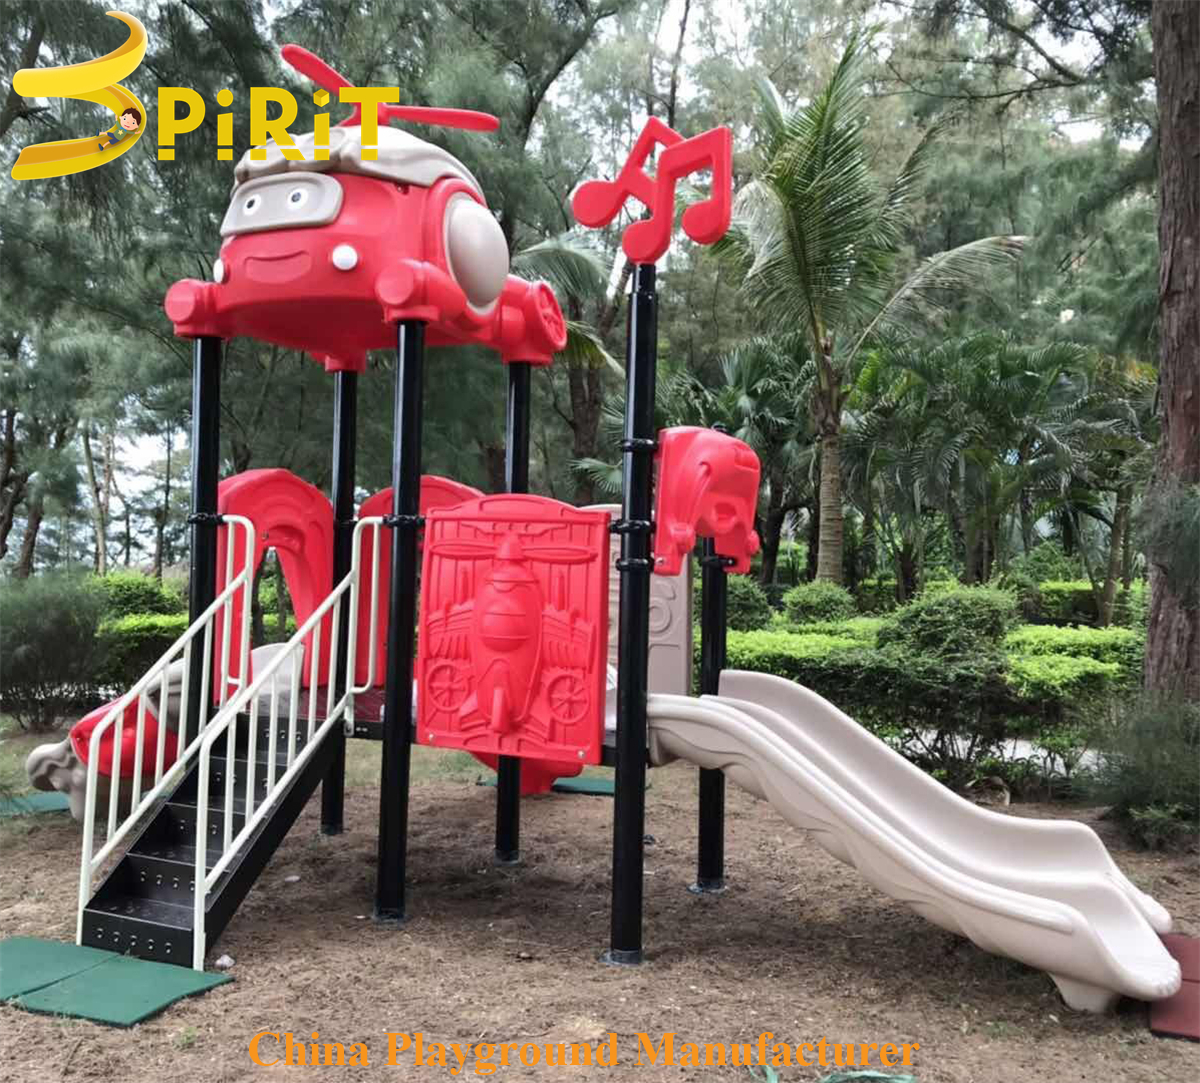 How much is SPIRIT playground equipment for sale?-SPIRIT PLAY,Outdoor Playground, Indoor Playground,Trampoline Park,Outdoor Fitness,Inflatable,Soft Playground,Ninja Warrior,Trampoline Park,Playground Structure,Play Structure,Outdoor Fitness,Water Park,Play System,Freestanding,Interactive,independente ,Inklusibo, Park, Pagsaka sa Bungbong, Dula sa Bata